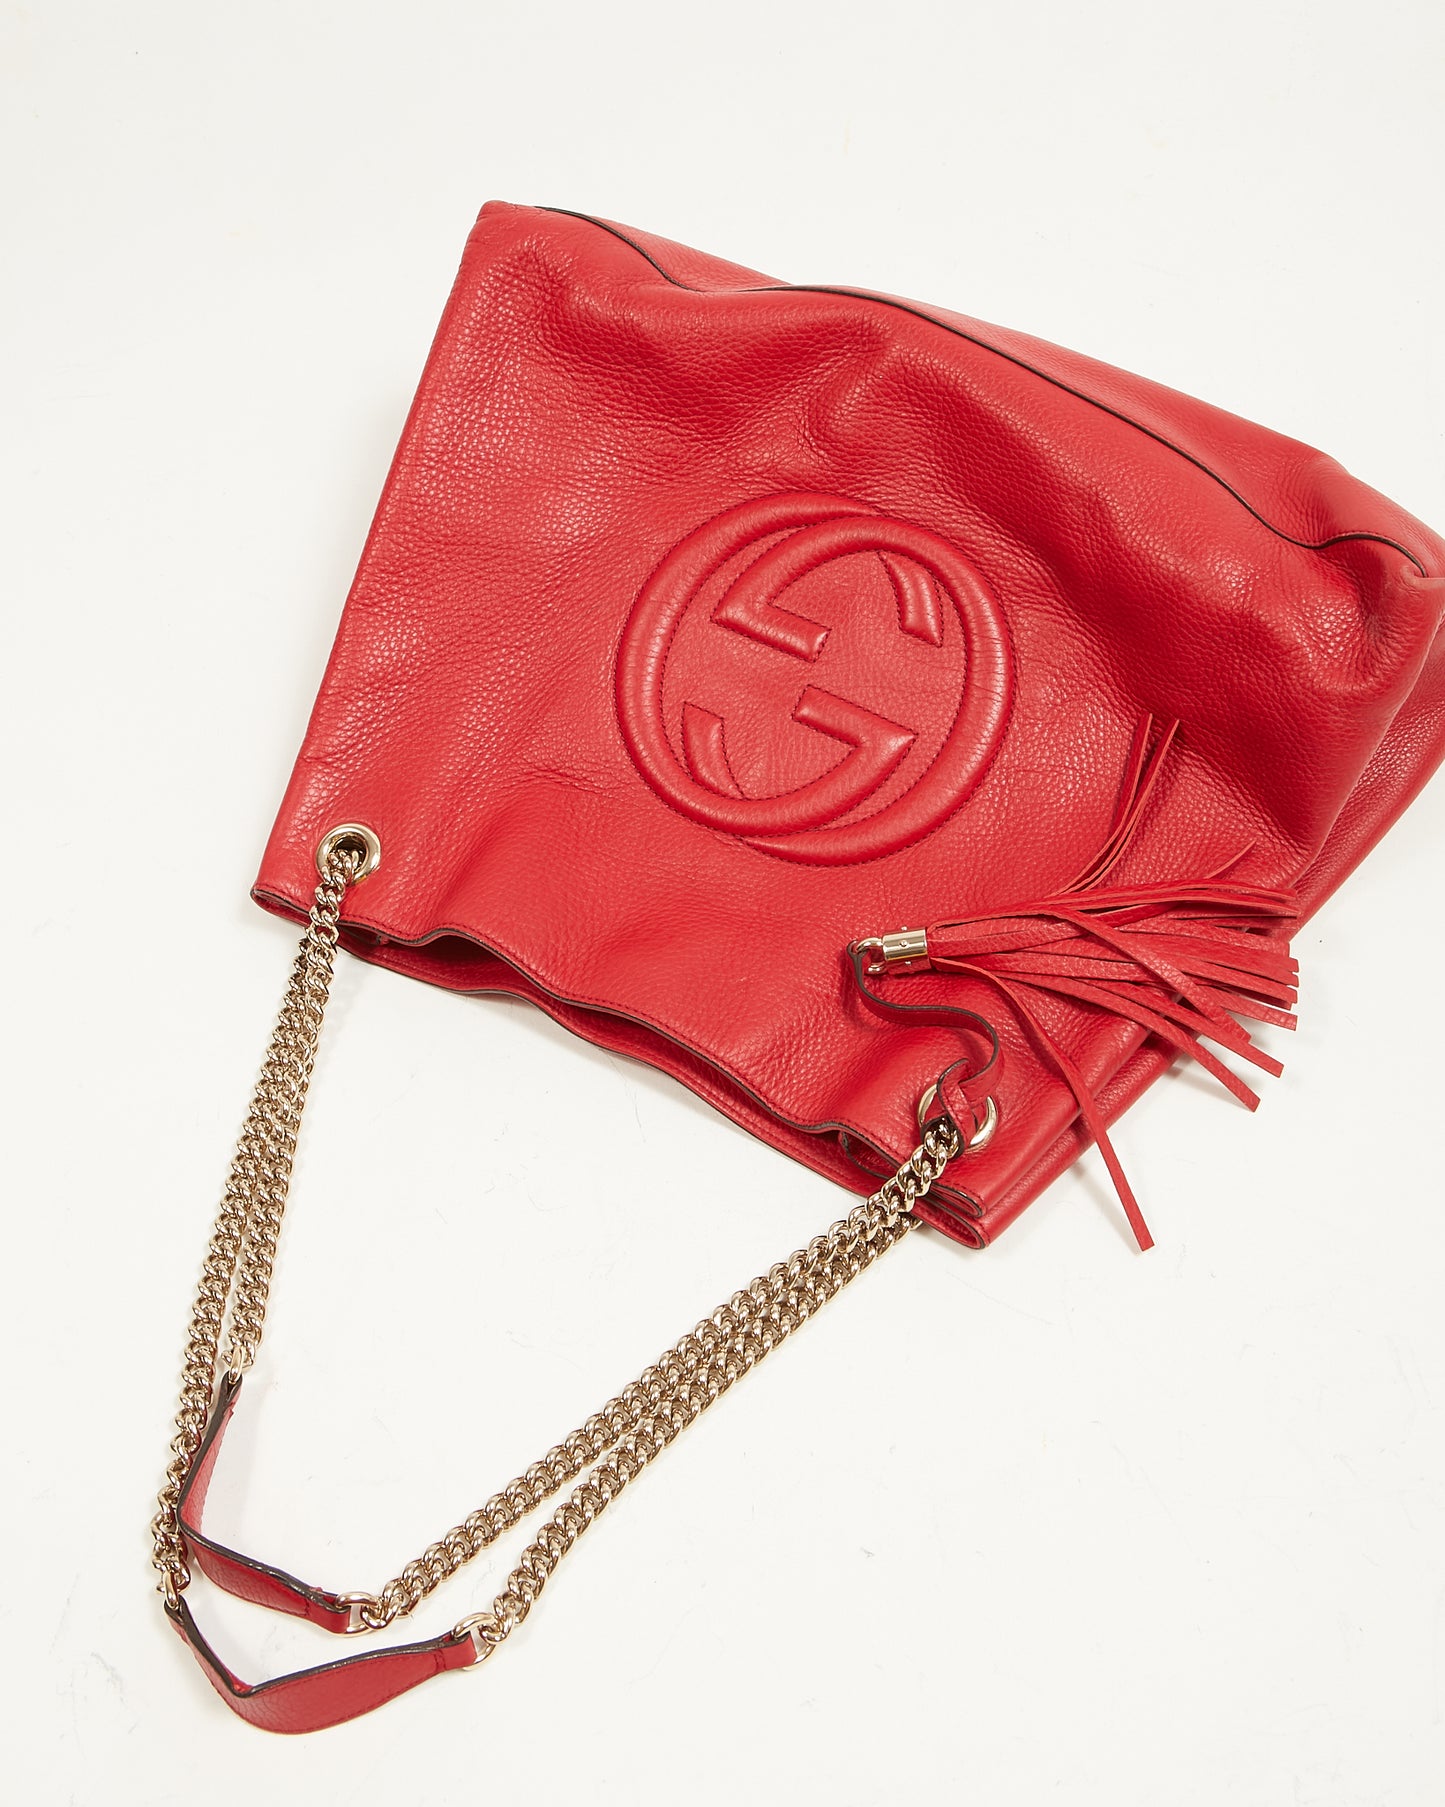 Gucci Red Pebbled Leather Large Soho Chain Shoulder Tote Bag